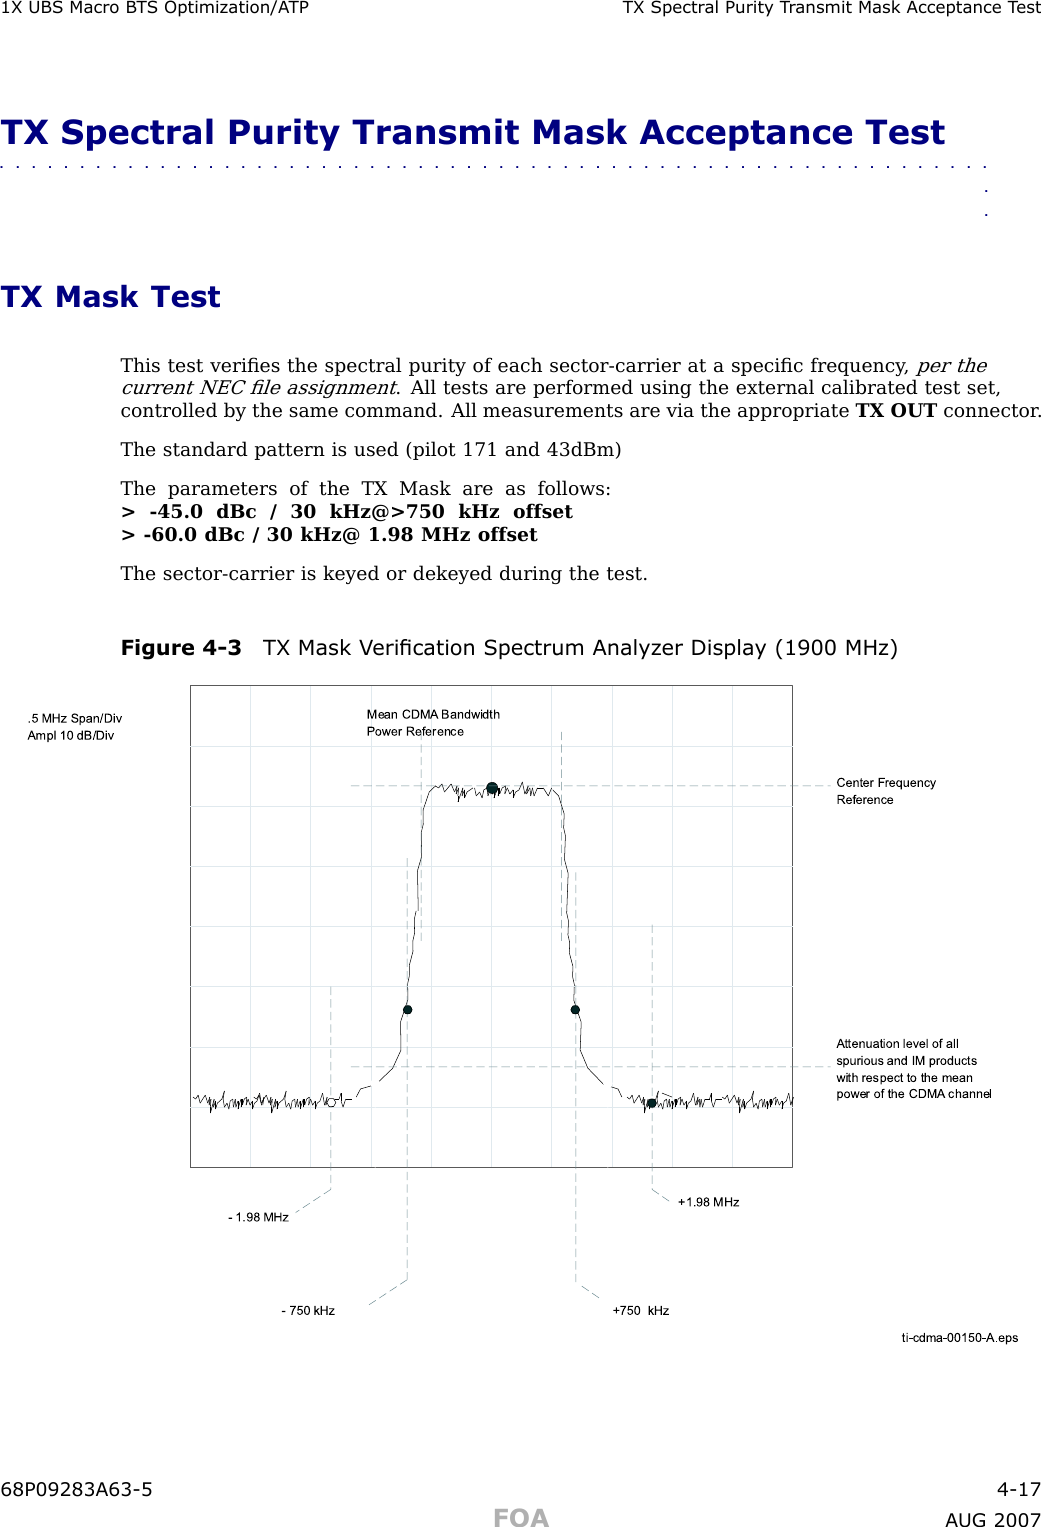 1X UBS Macro B T S Optimization/A TP TX Spectr al Purit y T r ansmit Mask Acceptance T estTX Spectral Purity Transmit Mask Acceptance Test■■■■■■■■■■■■■■■■■■■■■■■■■■■■■■■■■■■■■■■■■■■■■■■■■■■■■■■■■■■■■■■■TX Mask TestThis test veriﬁes the spectral purity of each sector -carrier at a speciﬁc frequency ,per thecurrent NEC ﬁle assignment. All tests are performed using the external calibrated test set,controlled by the same command. All measurements are via the appropriate TX OUT connector .The standard pattern is used (pilot 171 and 43dBm)The parameters of the TX Mask are as follows:&gt; -45.0 dBc / 30 kHz@&gt;750 kHz offset&gt; -60.0 dBc / 30 kHz@ 1.98 MHz offsetThe sector -carrier is keyed or dekeyed during the test.Figure 4 -3 TX Mask V erication Spectrum Analyz er Displa y (1900 MHz)ti-cdma-00150-A.eps- 900 kHzCenter Frequency ReferenceAttenuation level of all spurious and IM products with respect to the mean power of the CDMA  channel.5 MHz Span/DivAmpl 10 dB/DivMean CDMA  Bandwidth Power Reference+750  kHz- 750 kHz- 1.98 MHz+1.98 MHz68P09283A63 -5 4 -17FOA A UG 2007